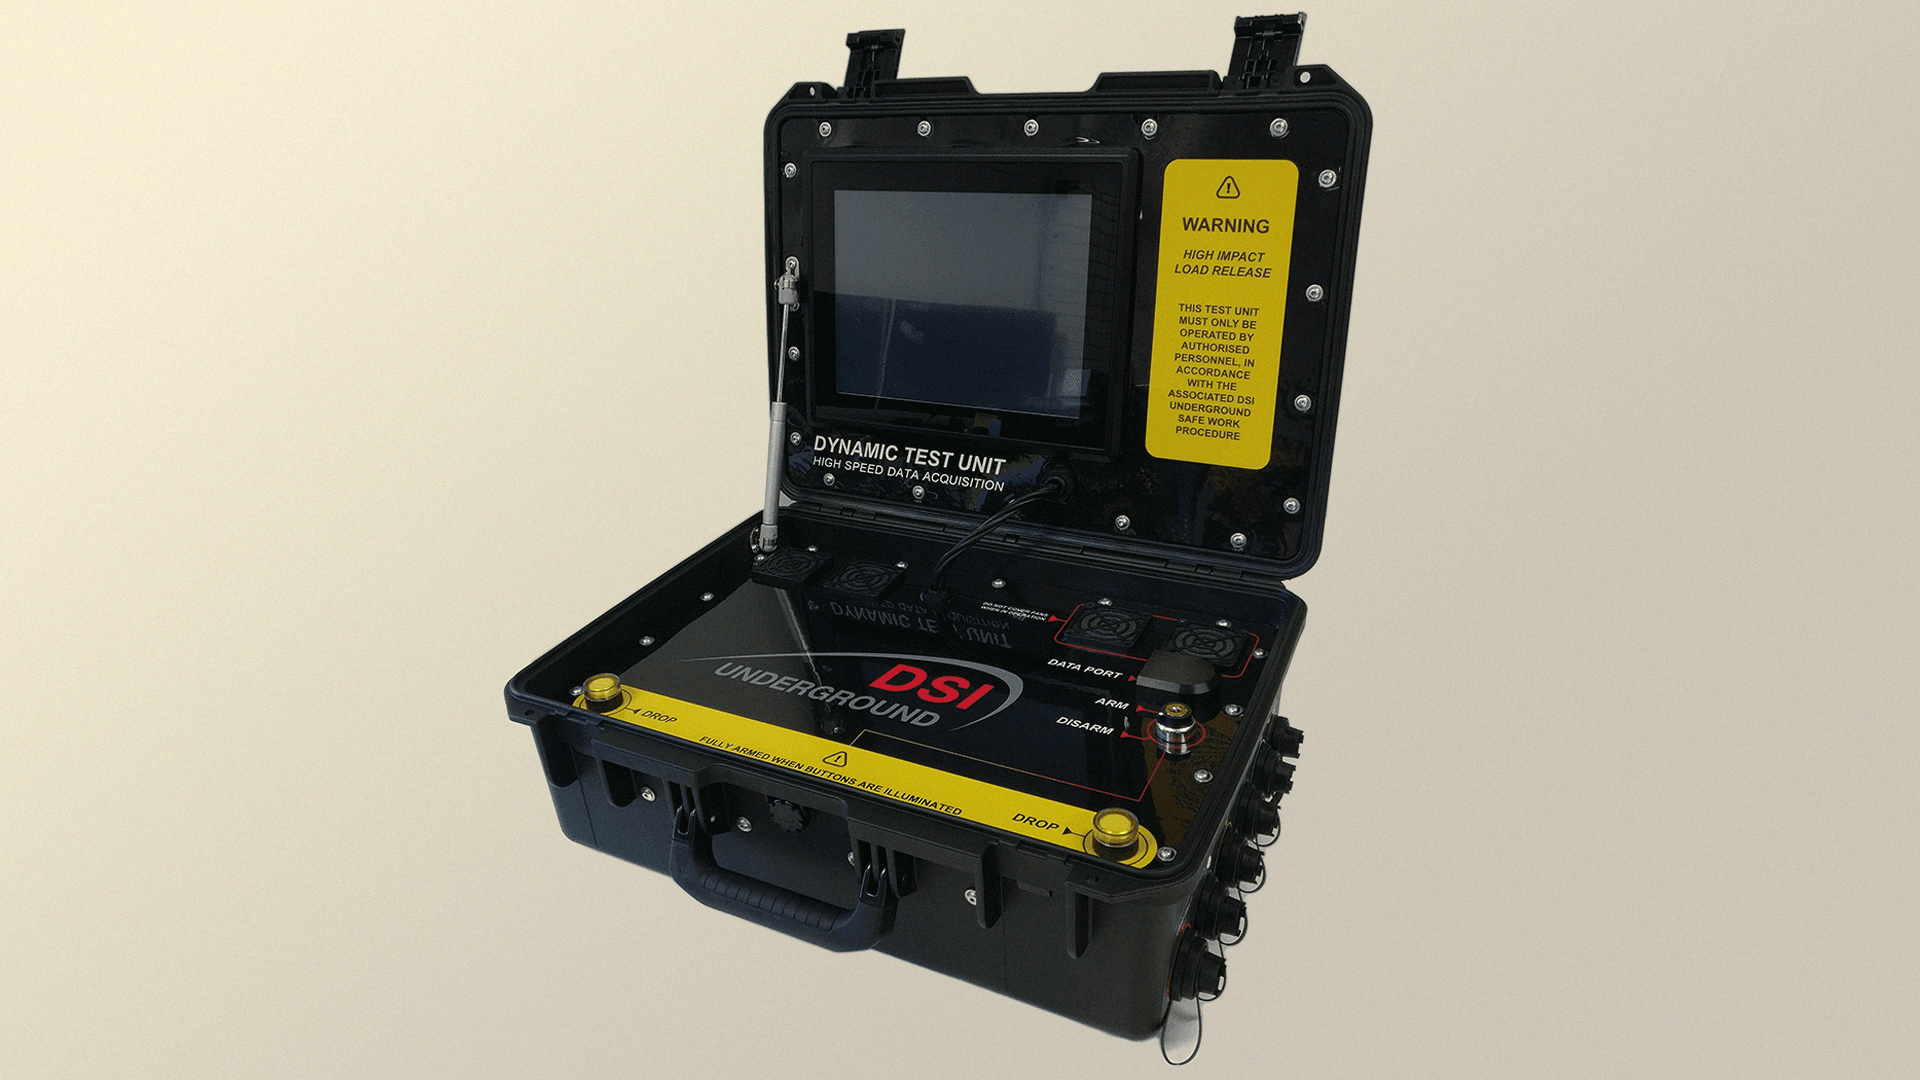 Rock bolt performance test system for monitoring forces associated with simulated rock fall events.